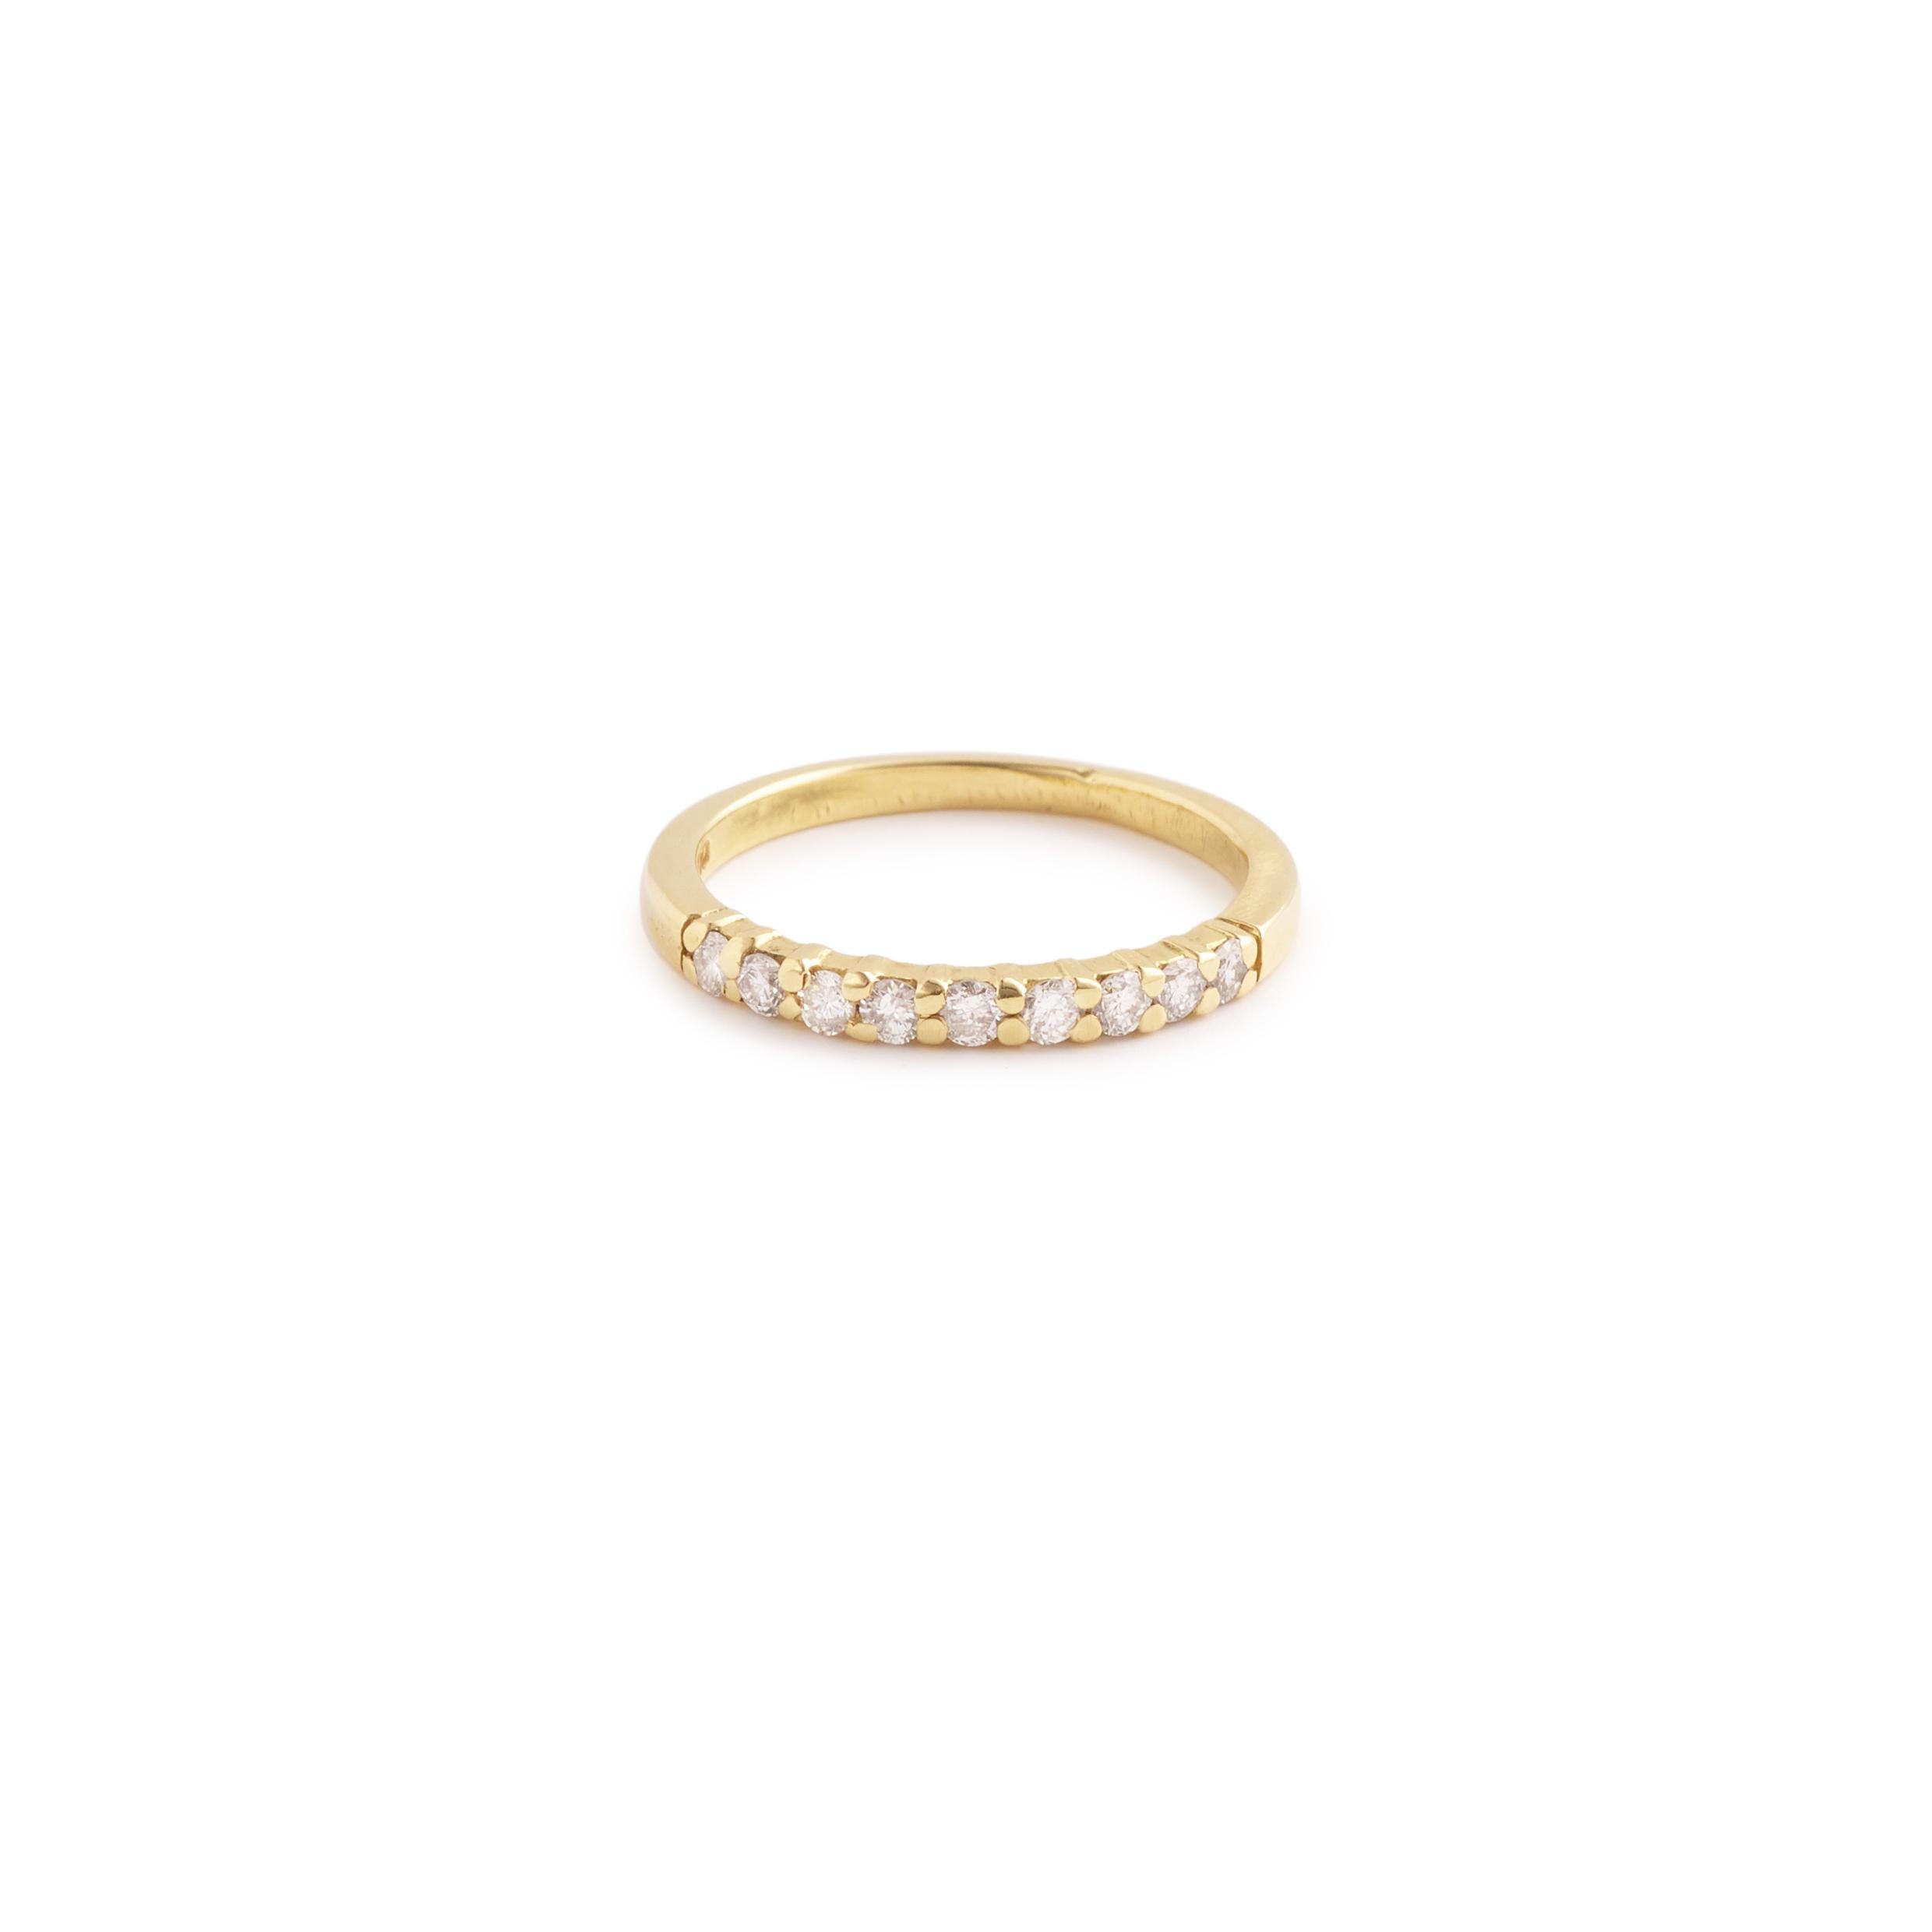 Yellow gold wedding band set with 9 small brilliant cut diamonds.

Total weight of diamonds: 0.10 carats

Dimensions : 2.45 mm (0.096 inch)

Finger size: 55 (US size: 7 1/4)

18 karat yellow gold, 750/1000th